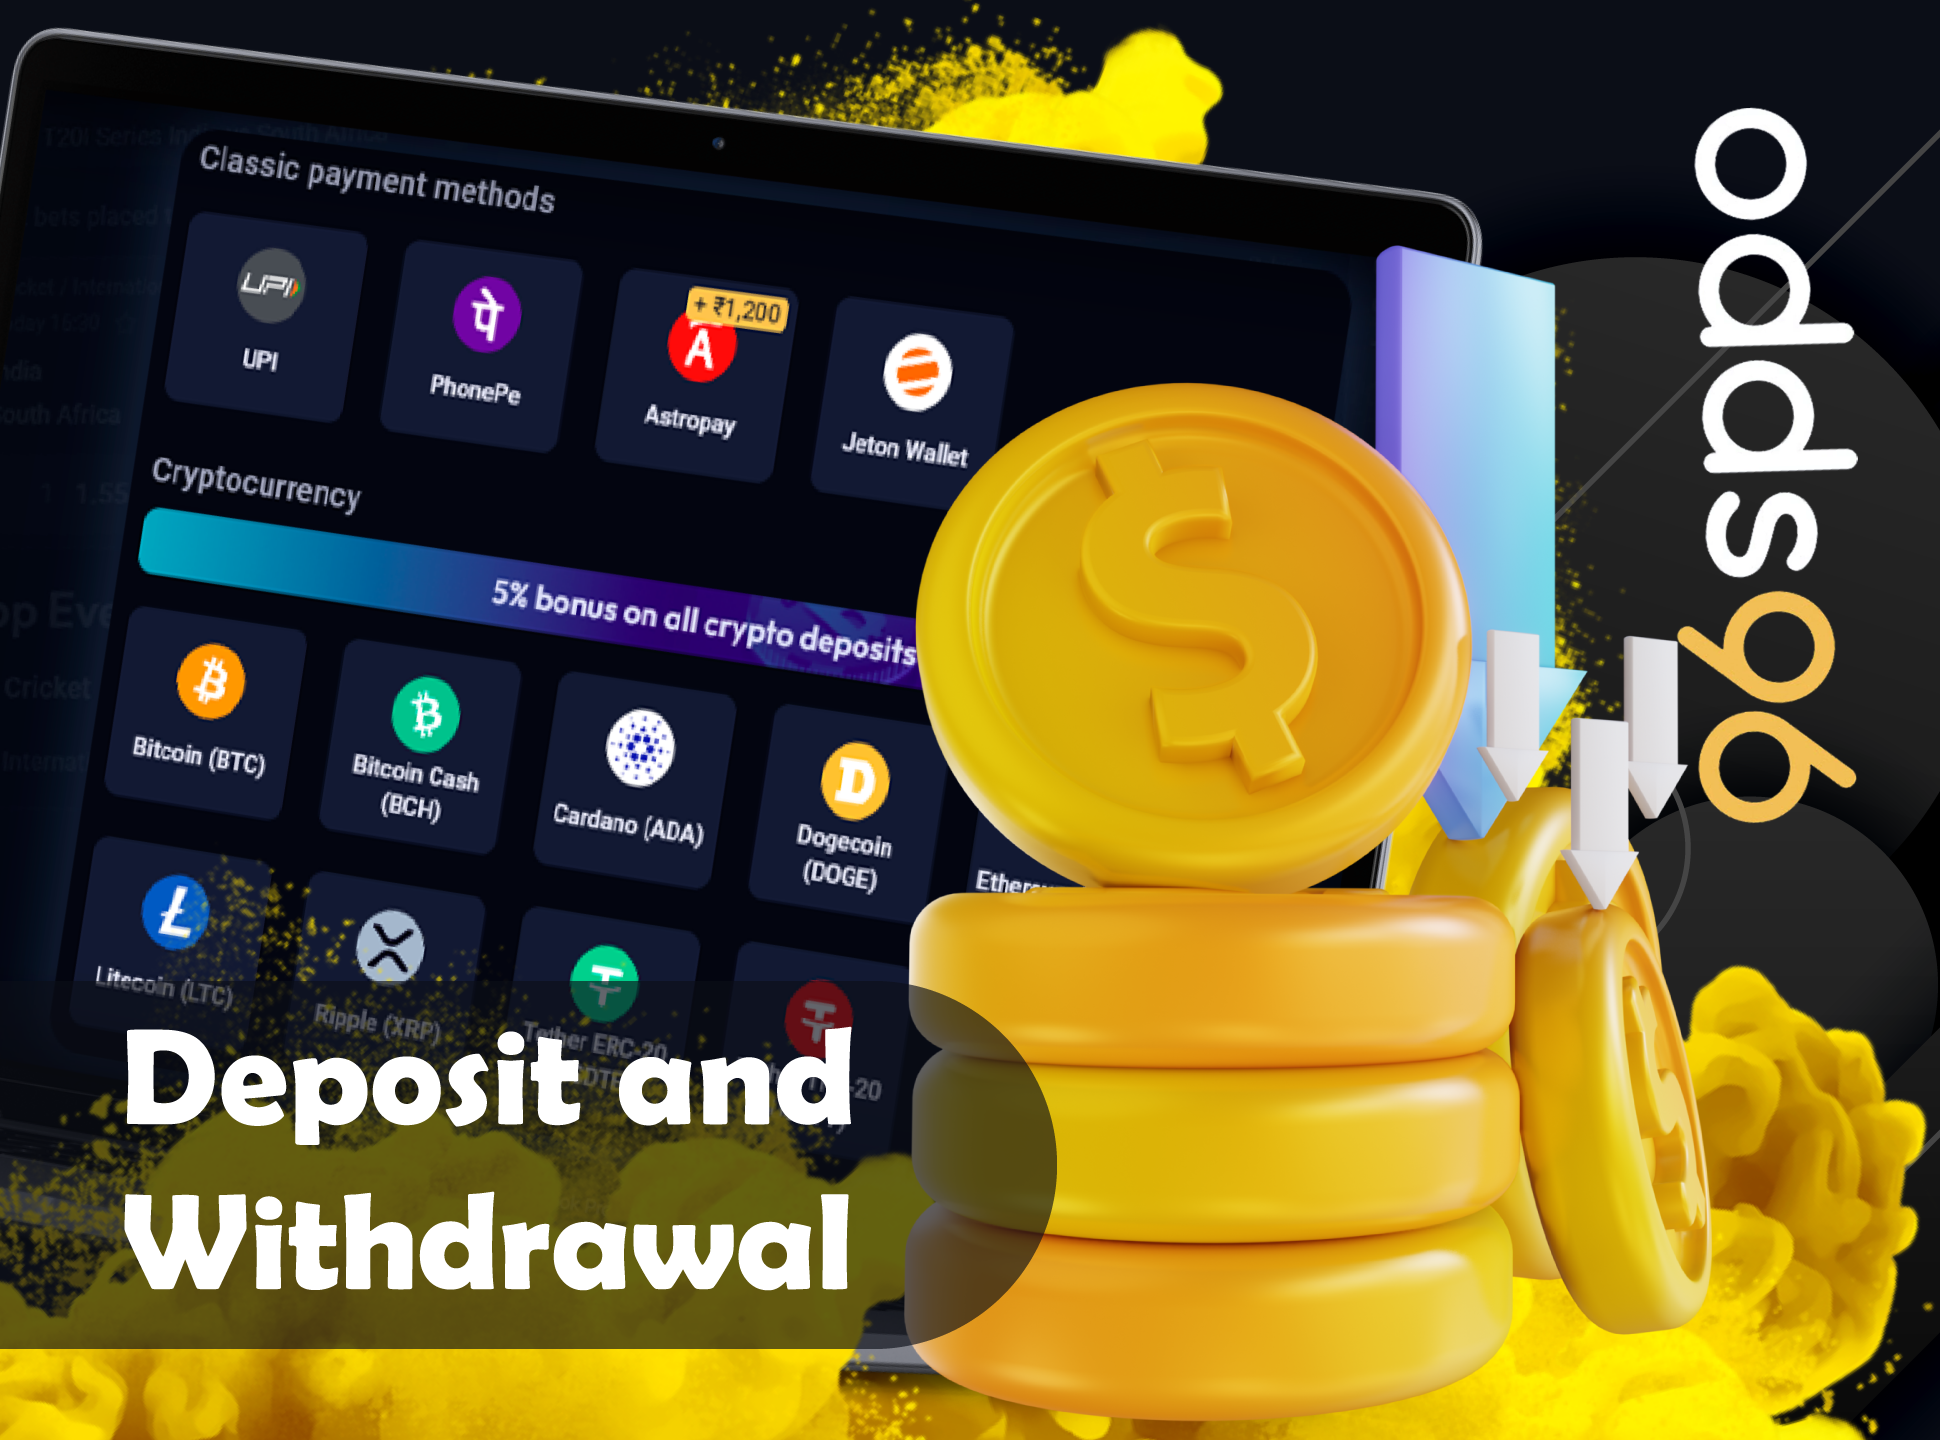 Deposit and withdraw money without any problems at Odds96.